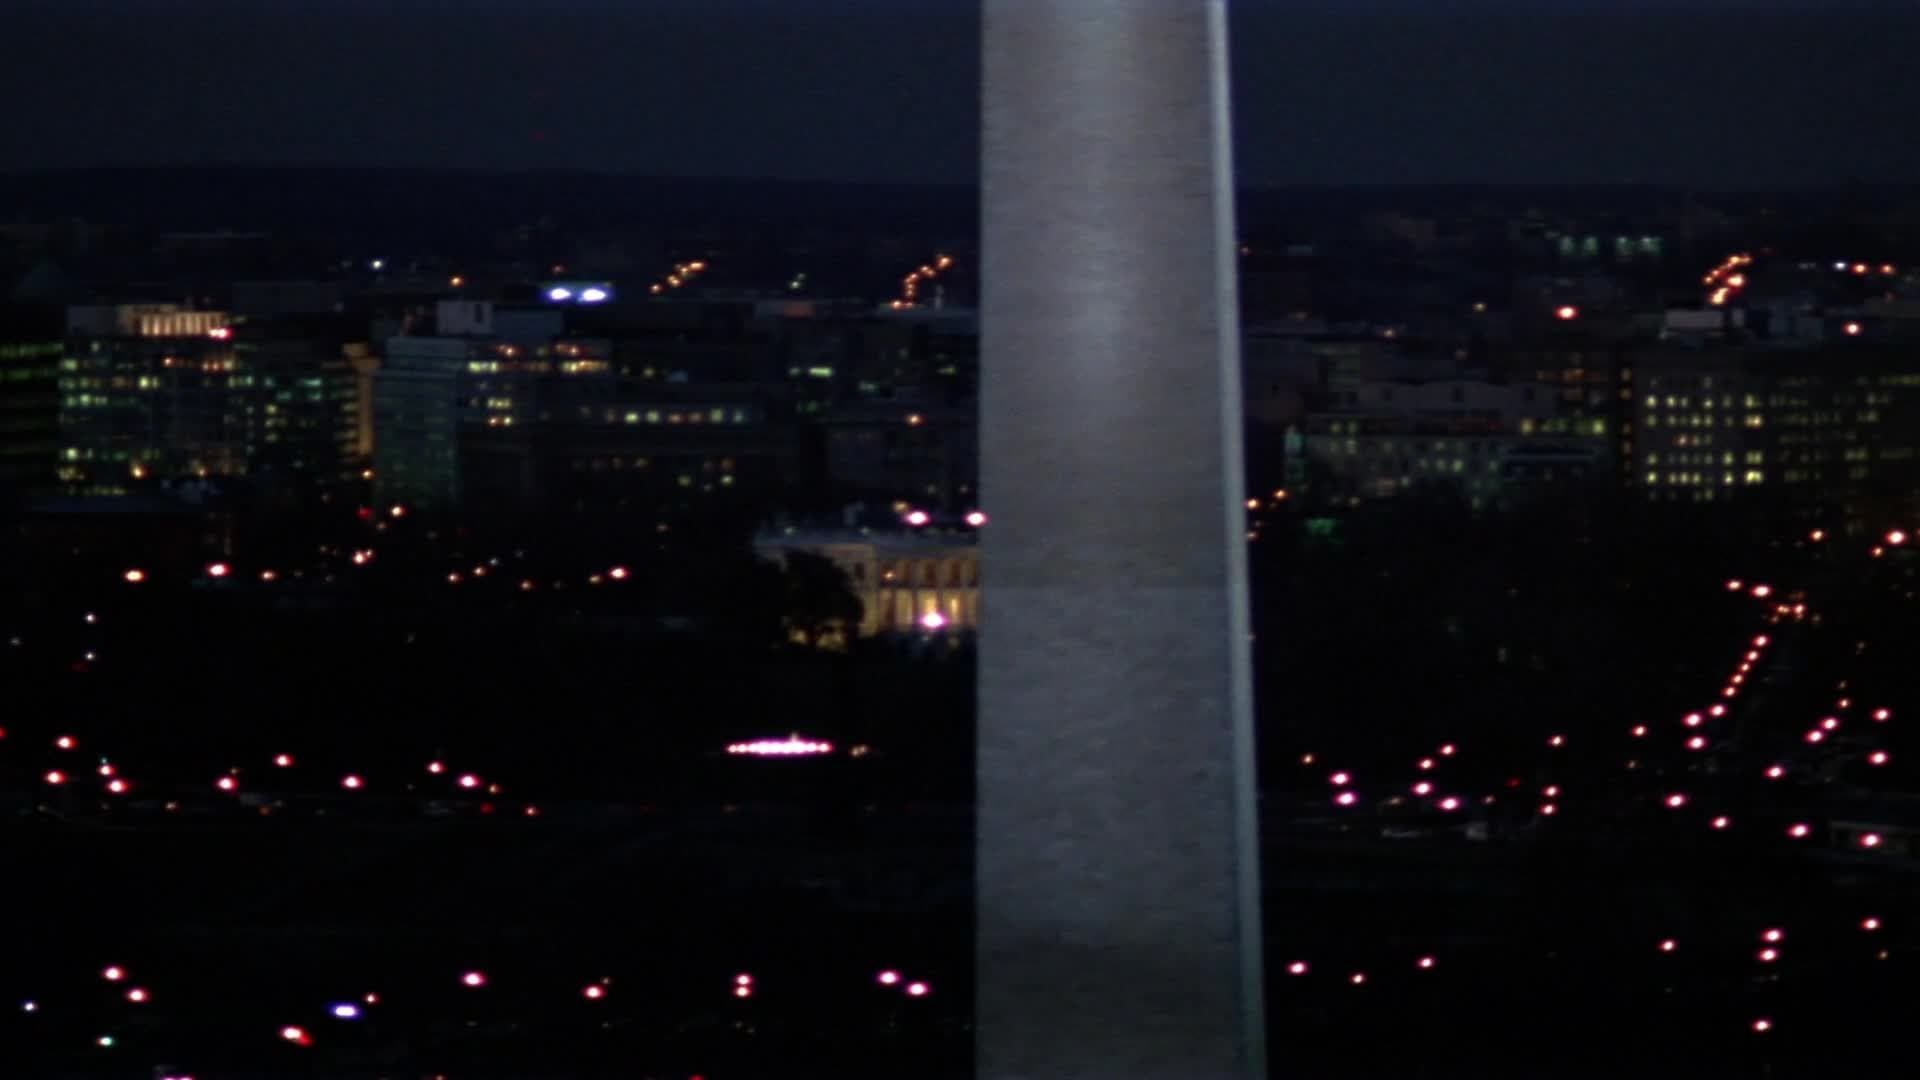 The West Wing background